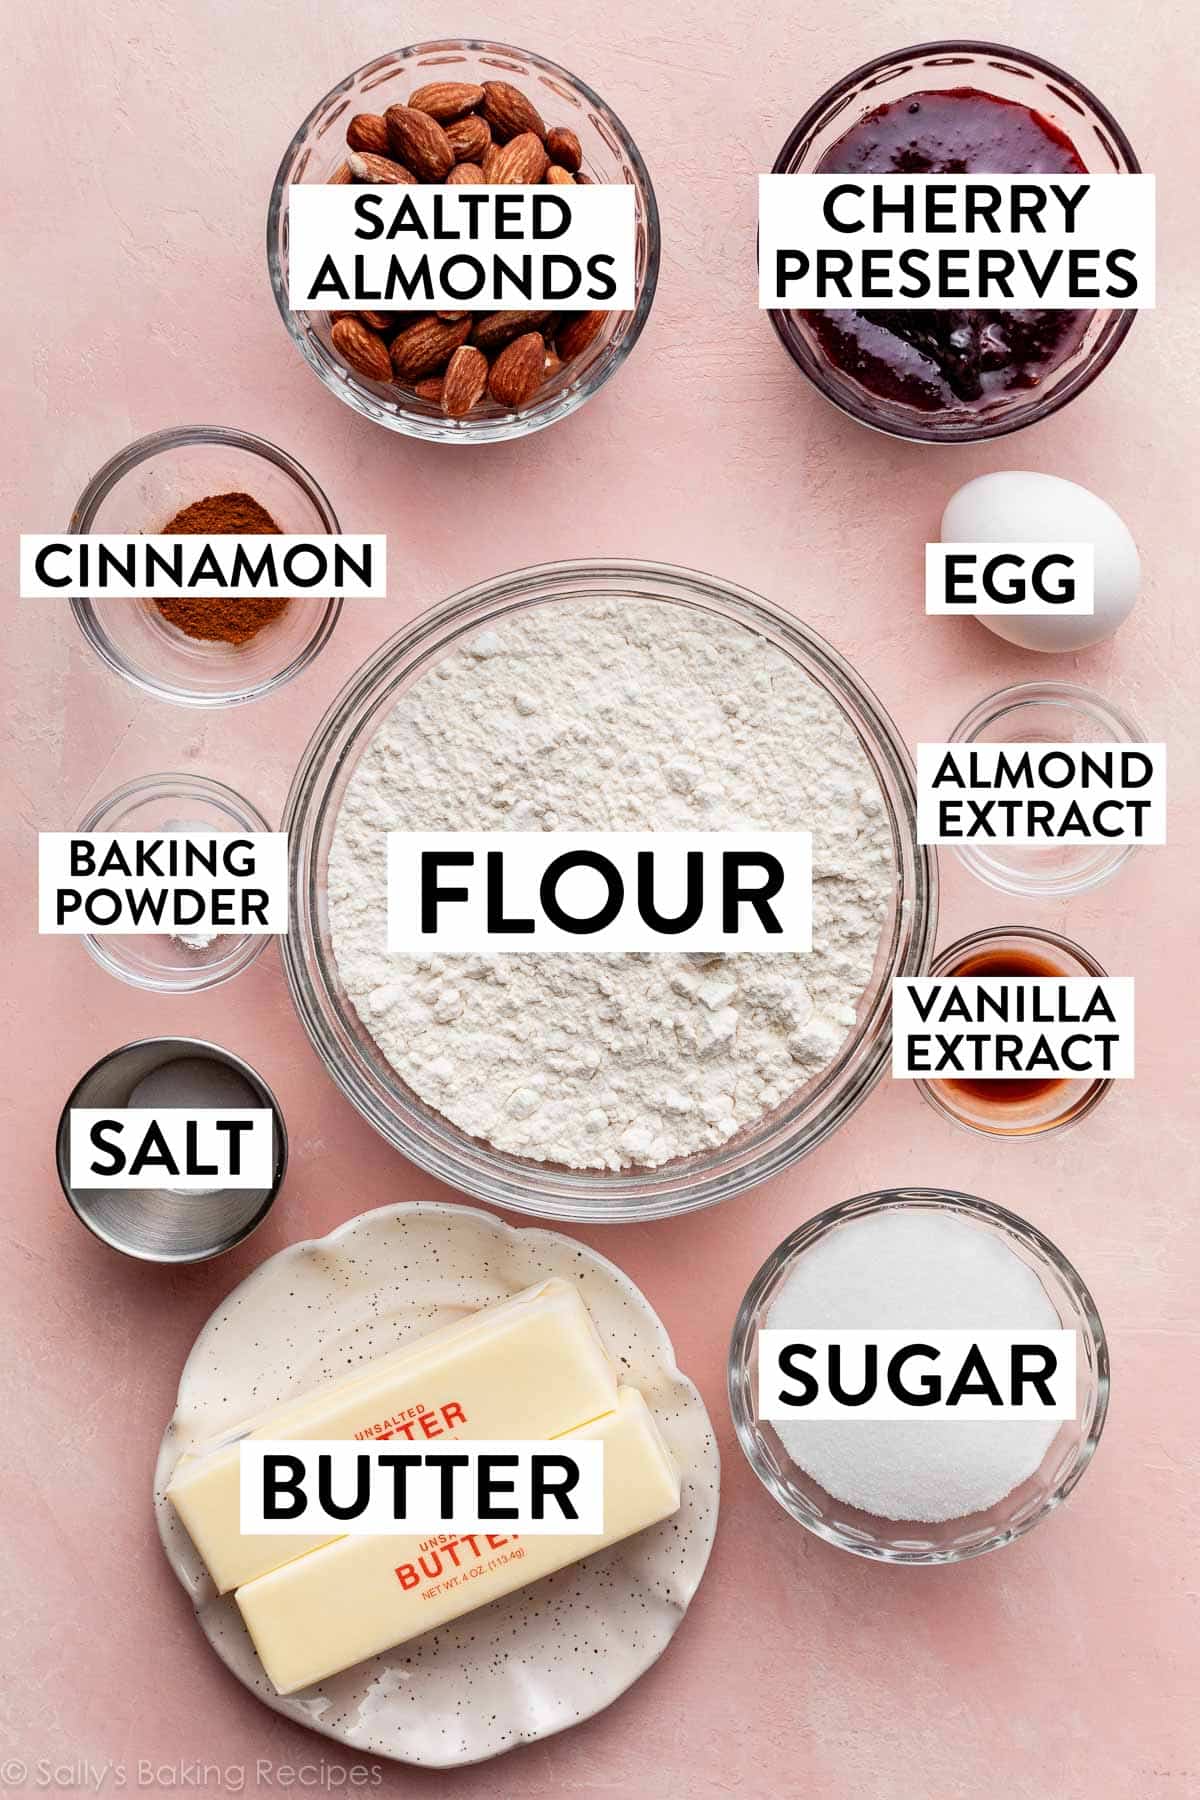 ingredients on pink backdrop including flour, jam, almonds, butter, sugar, egg, vanilla, and cinnamon.